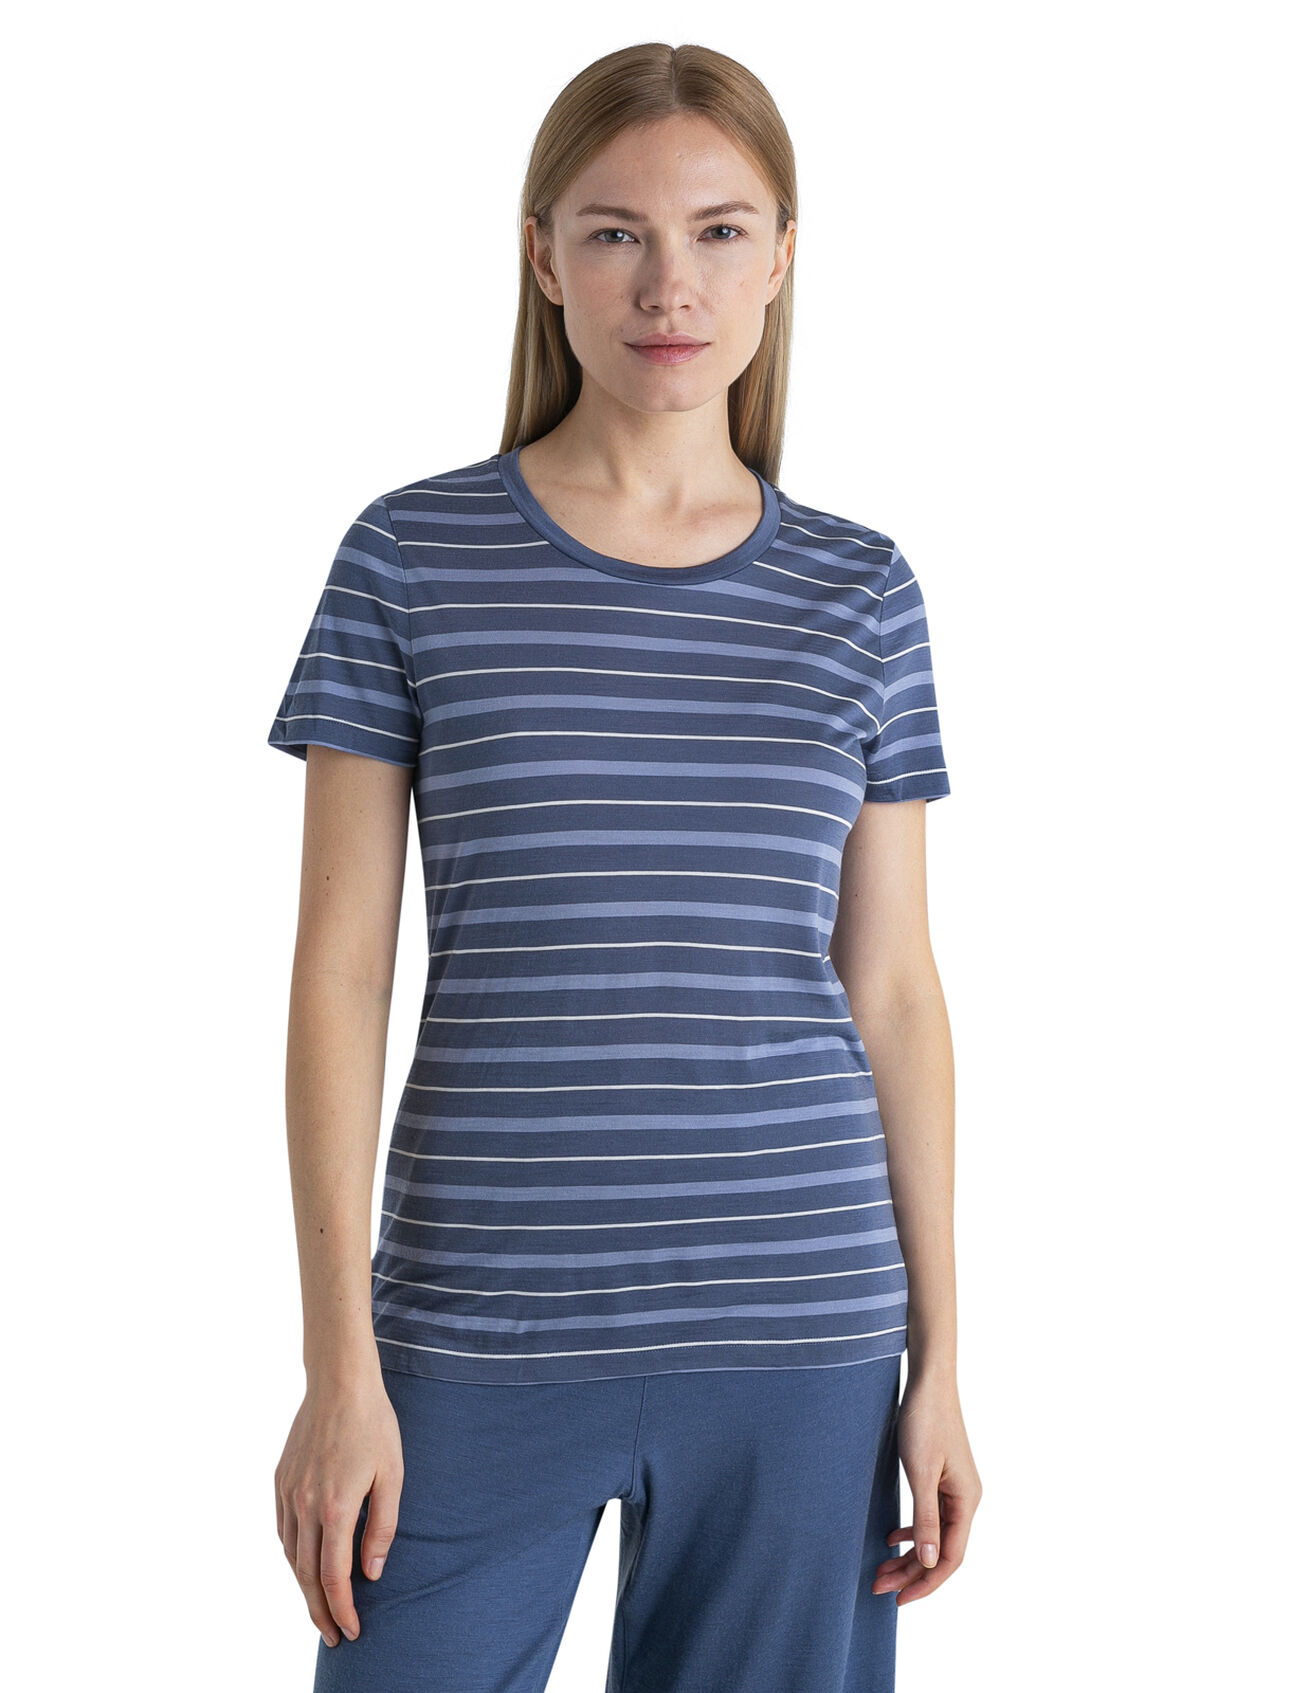 Womens Merino Blend Wave T-Shirt Stripe A lightweight merino-blend tee with classic style that's perfect for warm weather, the Wave Short Sleeve Tee Stripe features our breathable, all-natural Cool-Lite™ jersey fabric.